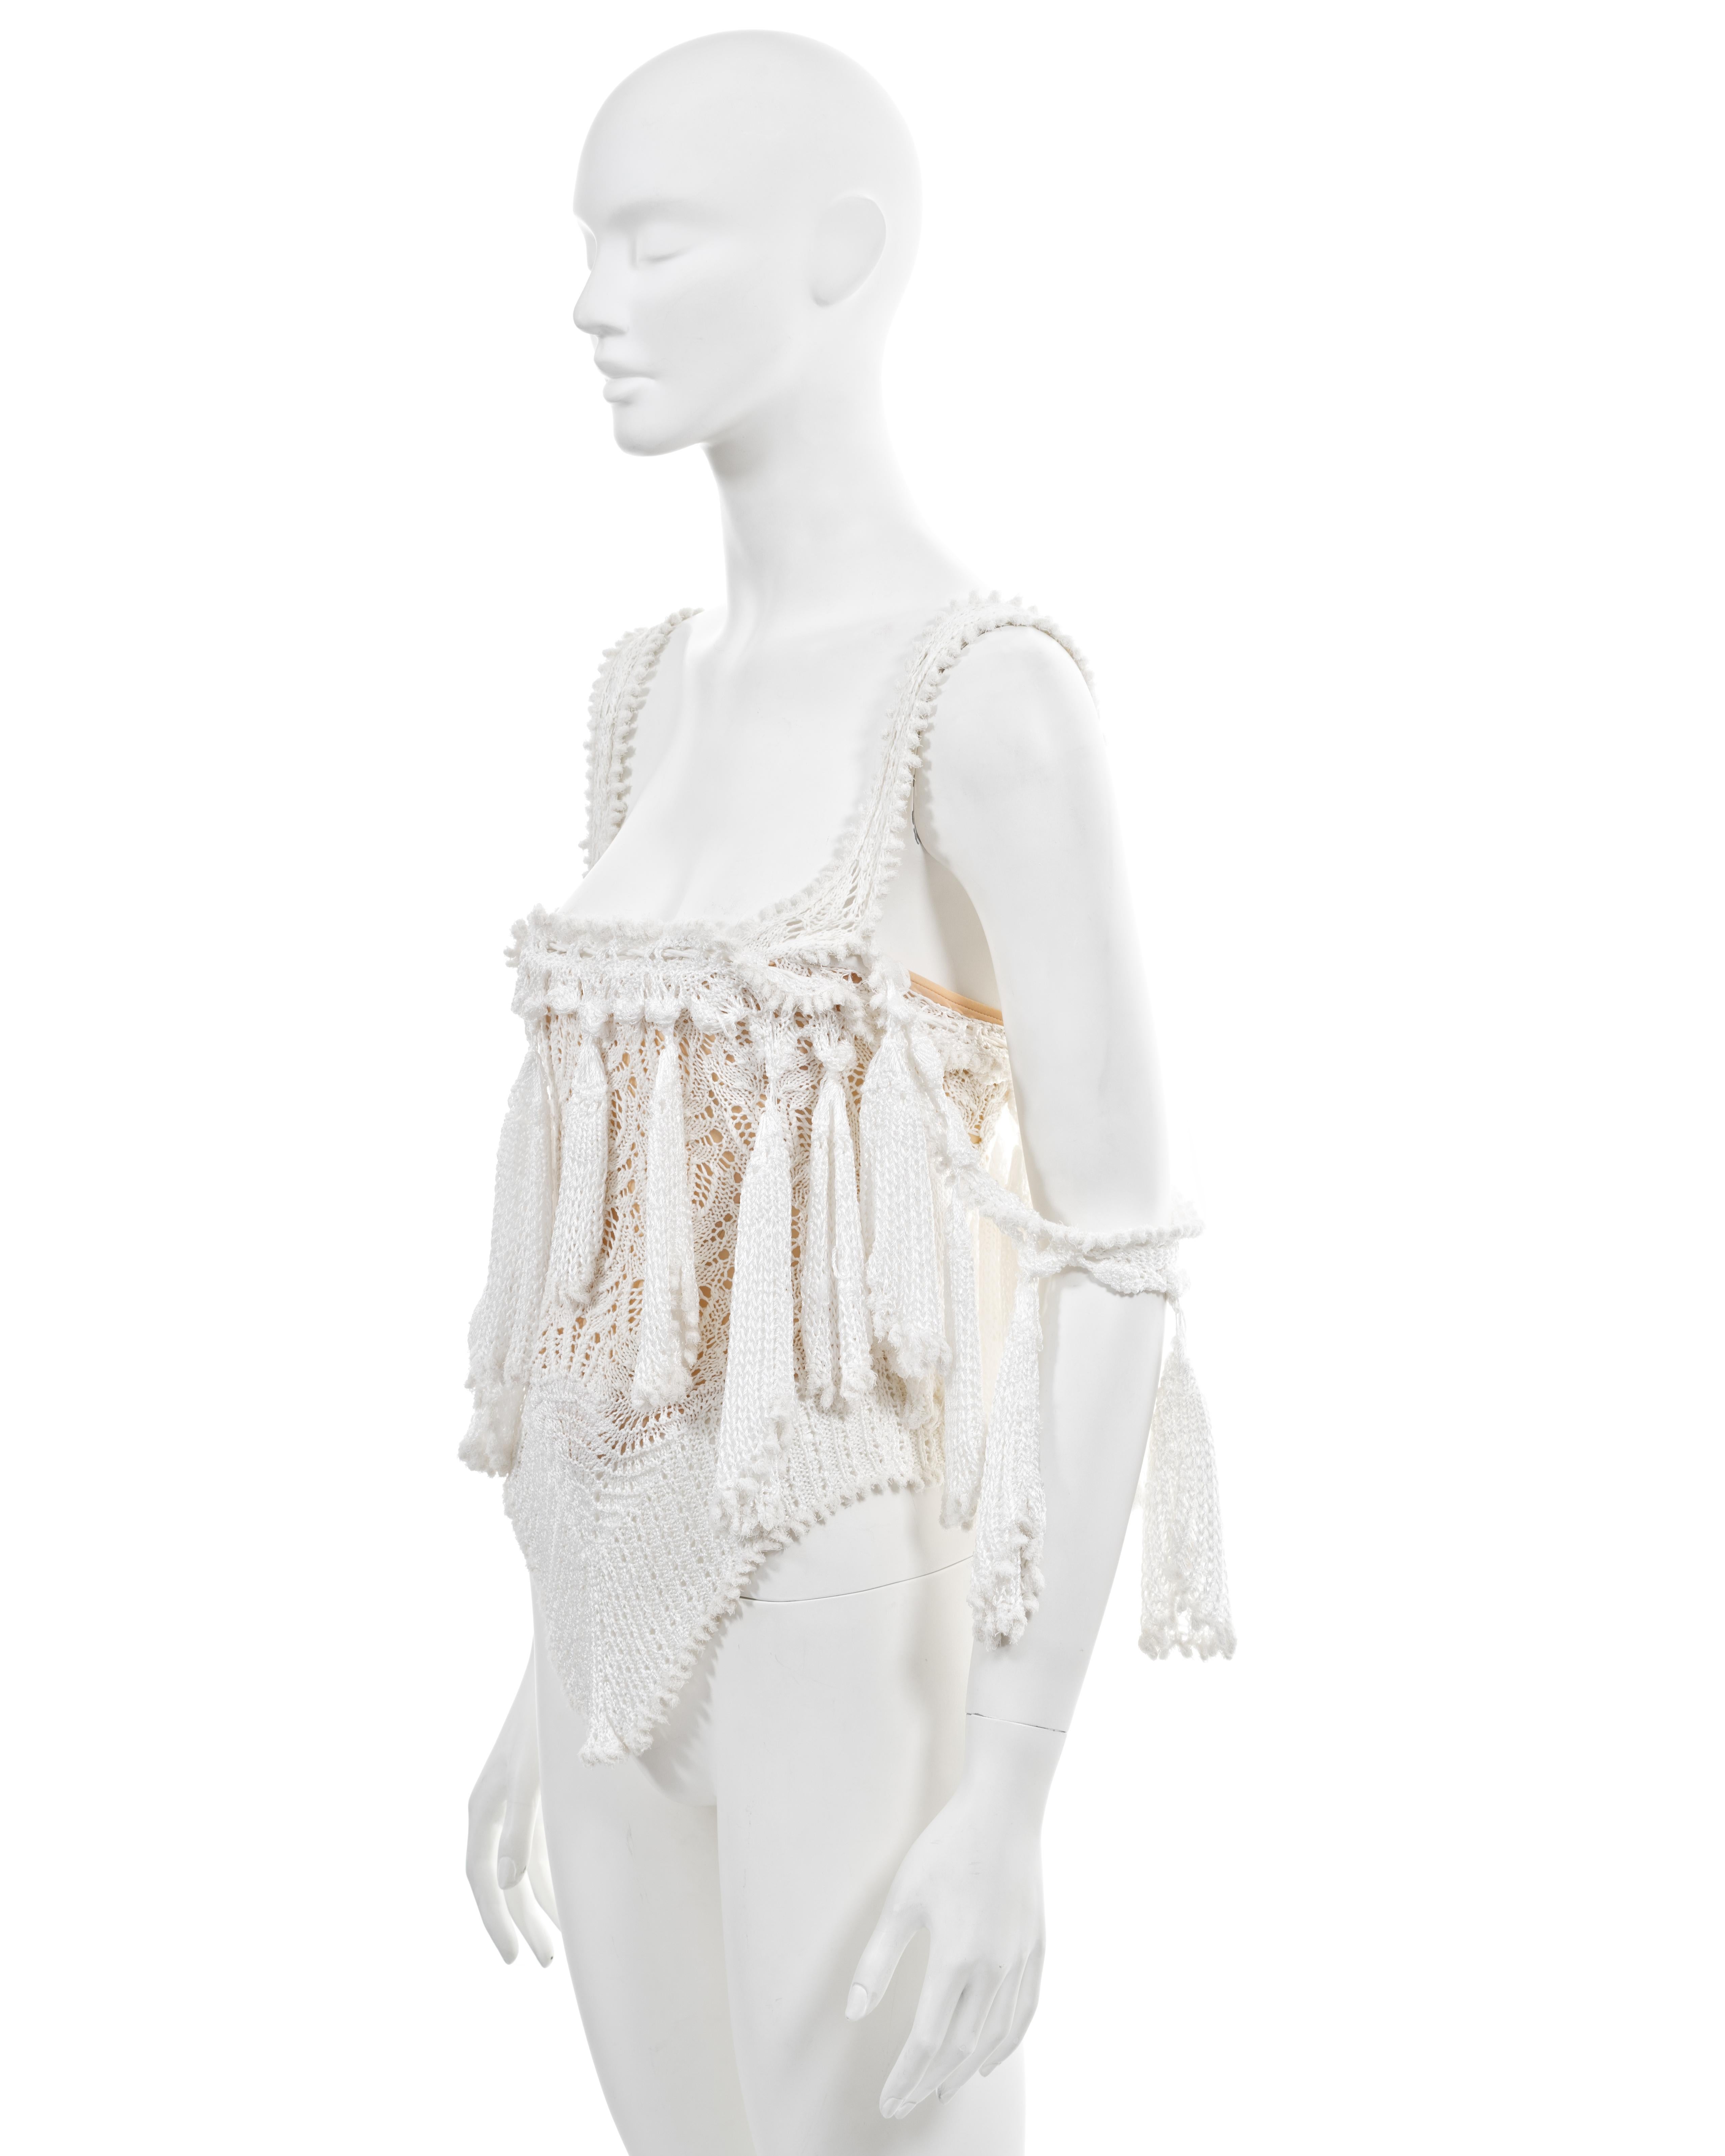 Vivienne Westwood 'Cafe Society' white knitted lace corset, ss 1994 For Sale 7